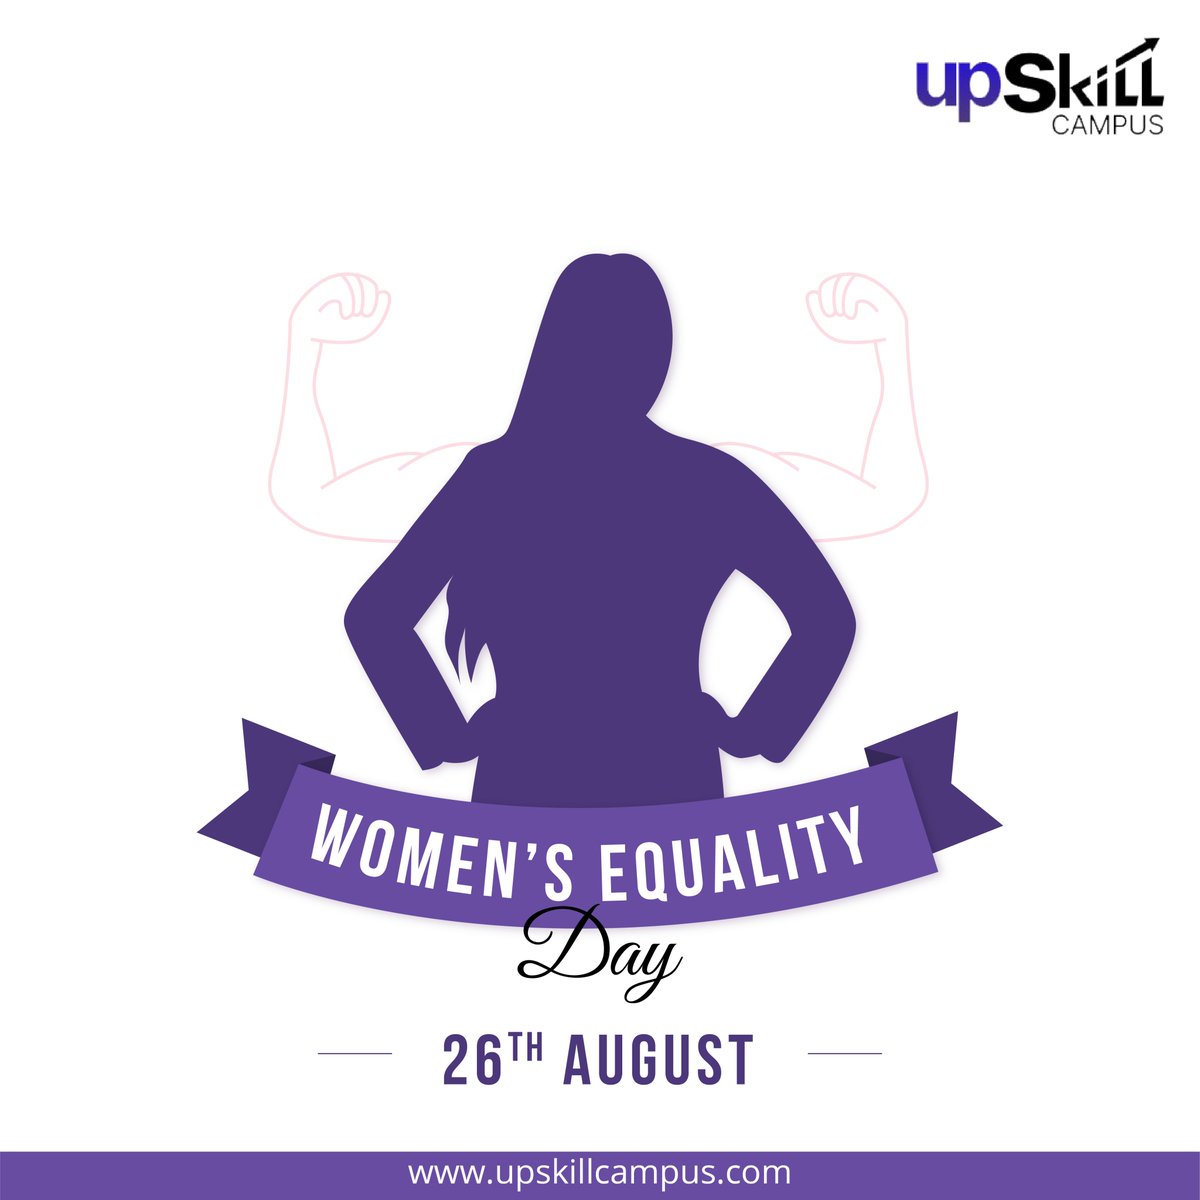 On this remarkable #WomensEqualityDay, we honor the indomitable #Spirit and #determination of those who have paved the way for #Gender #Equality, and we recommit ourselves to the ongoing journey ahead. #TheIoTAcademy #edtech #education #womenempowerment #women #equalityforall